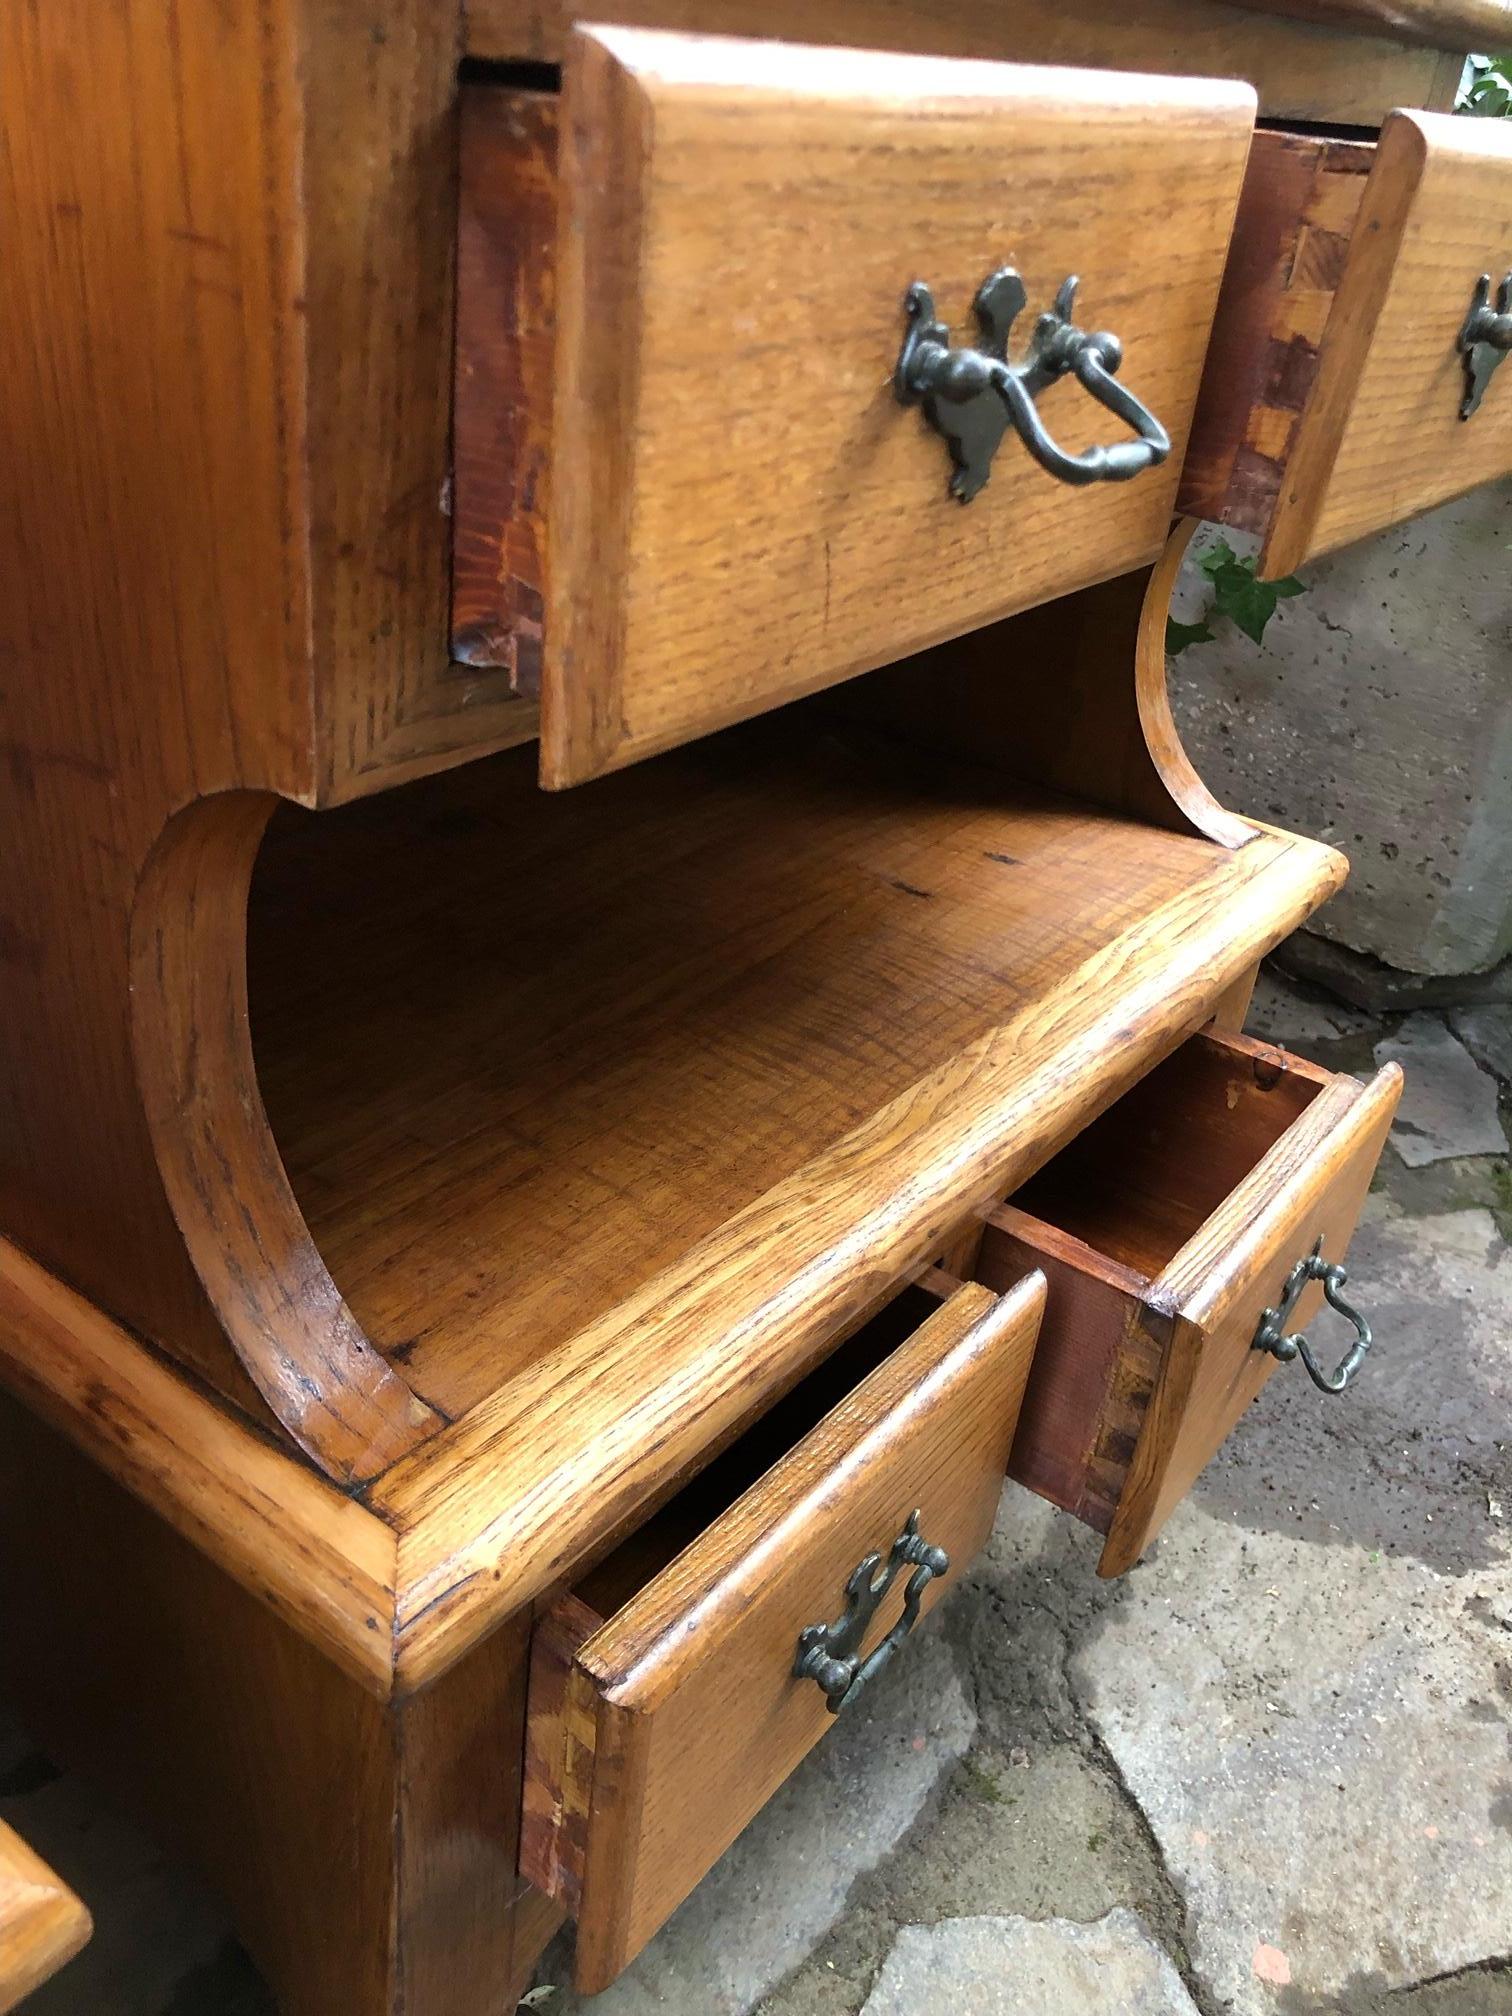 20th Century Pair of Italian night stands in chestnut with four drawers.
They have a typical design of the time and are very comfortable. 
The paintwork is original in patina.
The handles are in original brass of the time.
Comes from an old